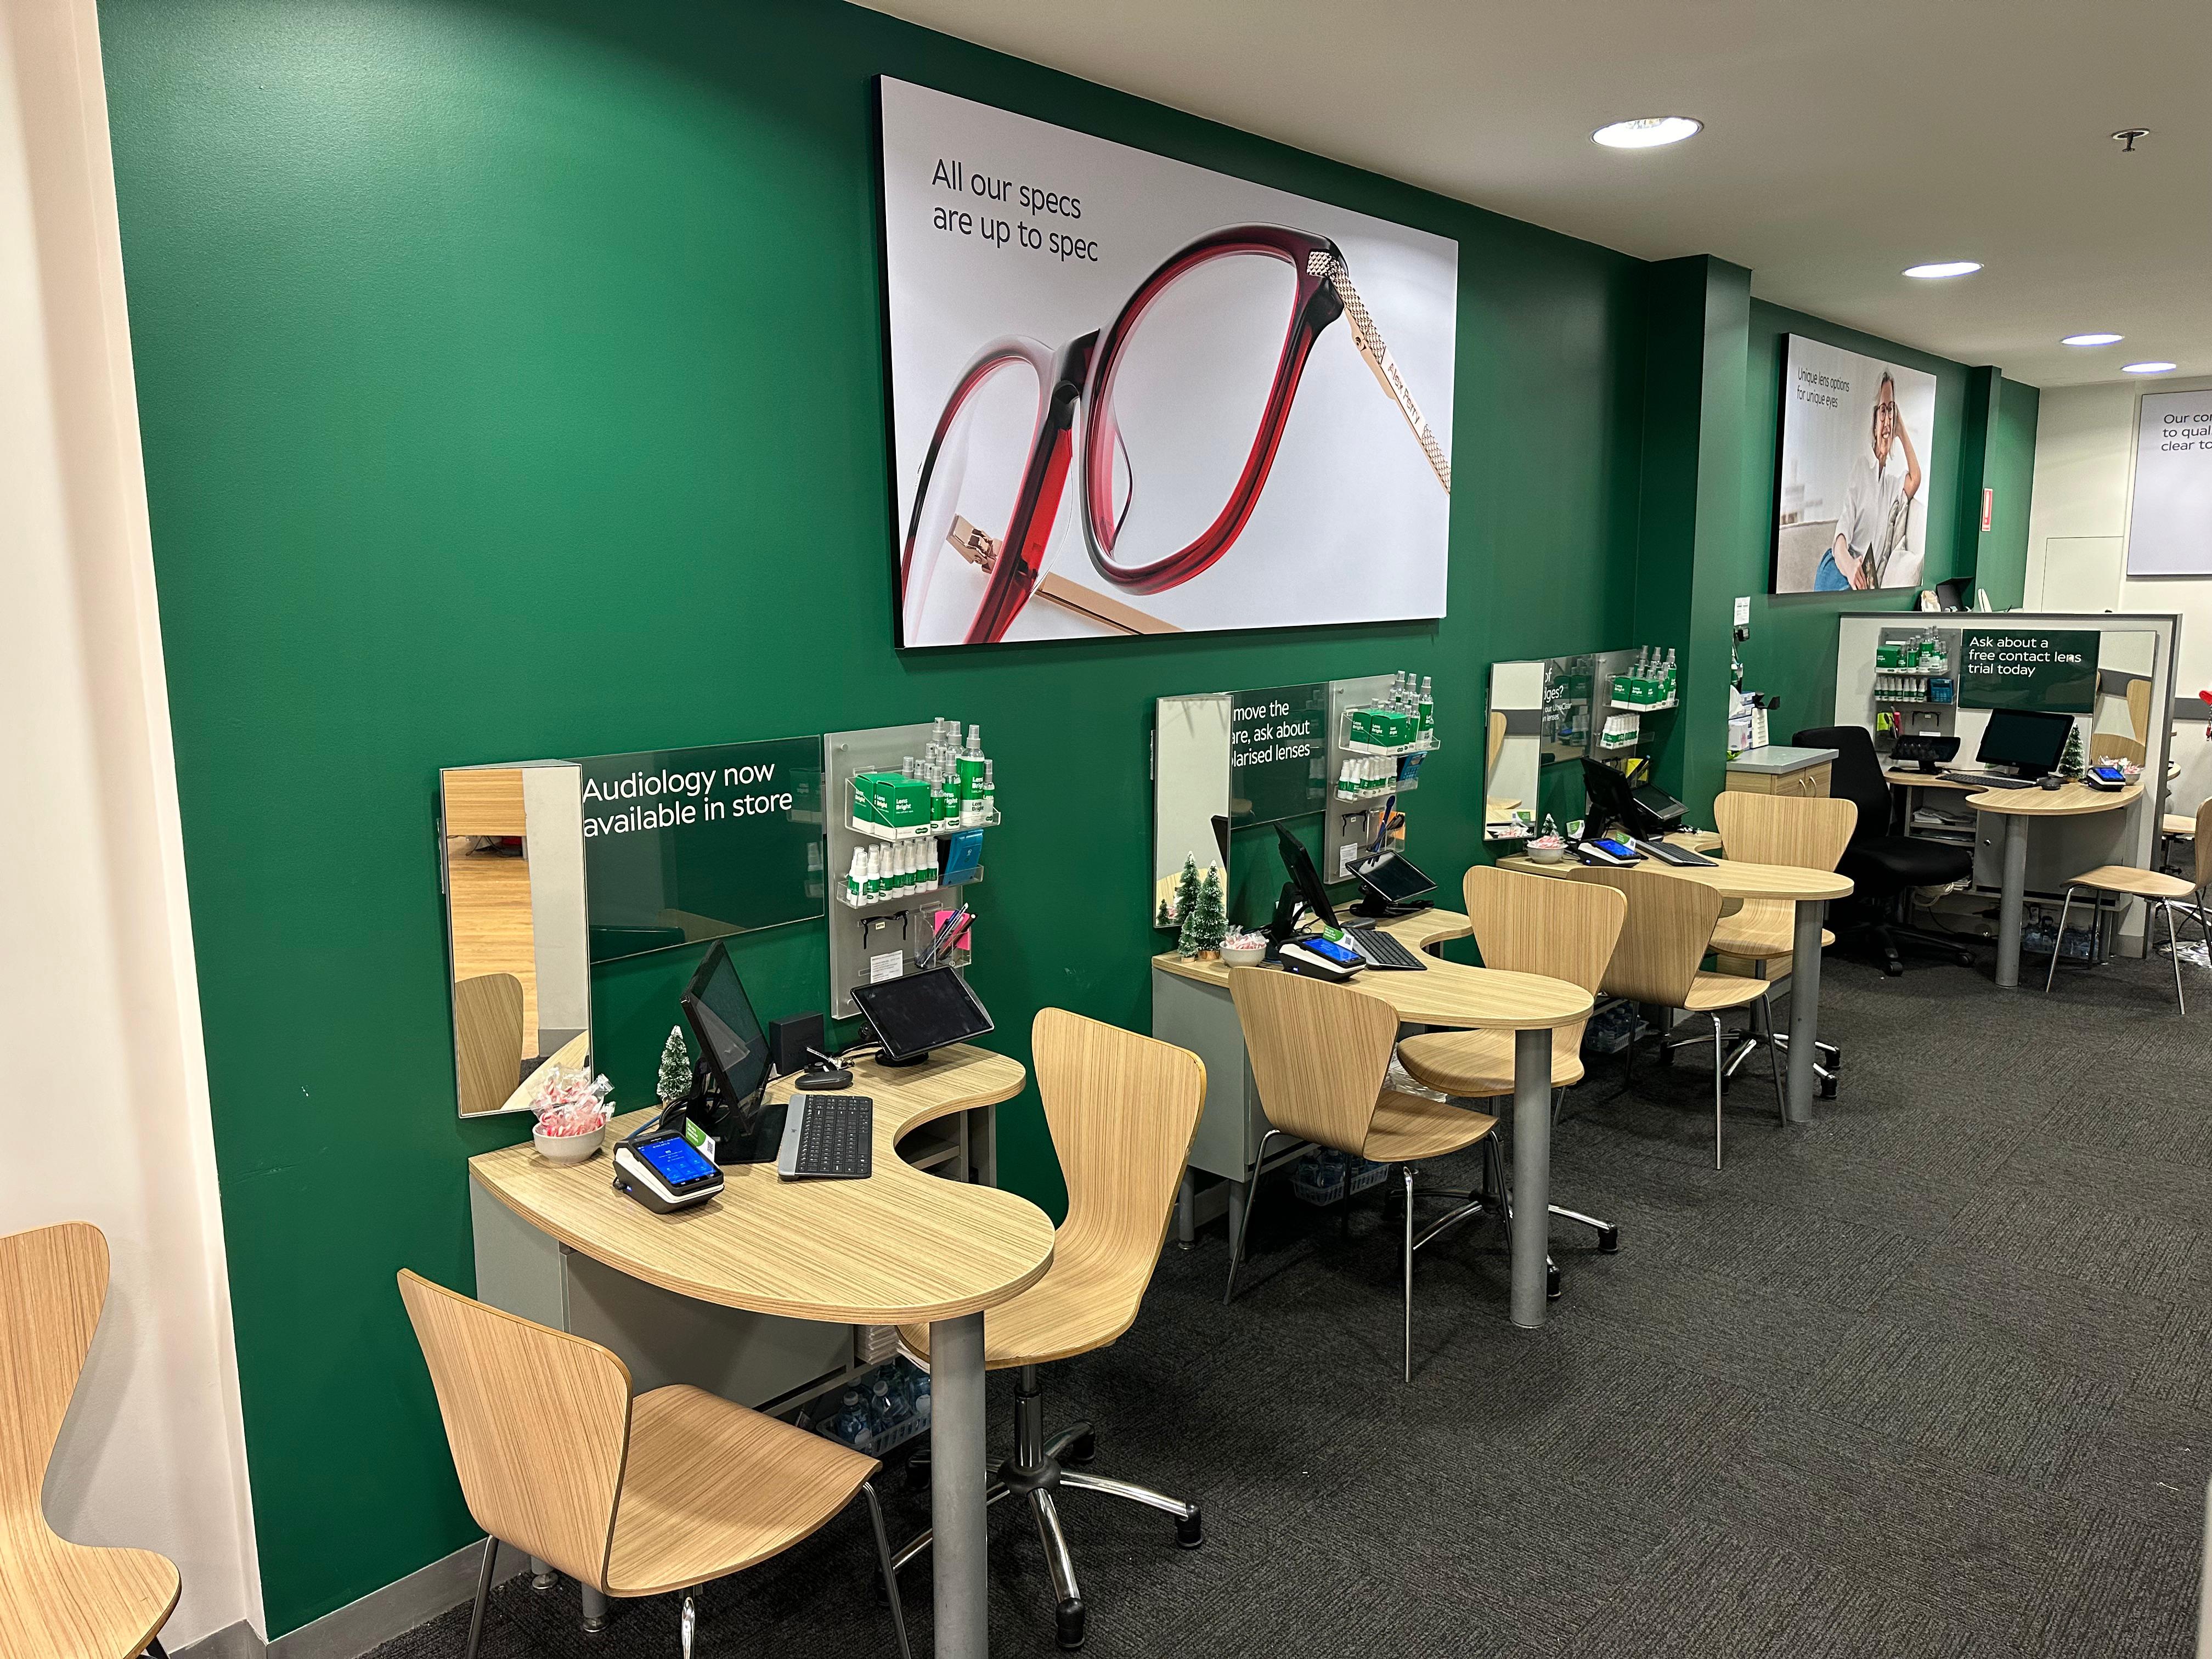 Images Specsavers Optometrists & Audiology - Broadmeadows S/C